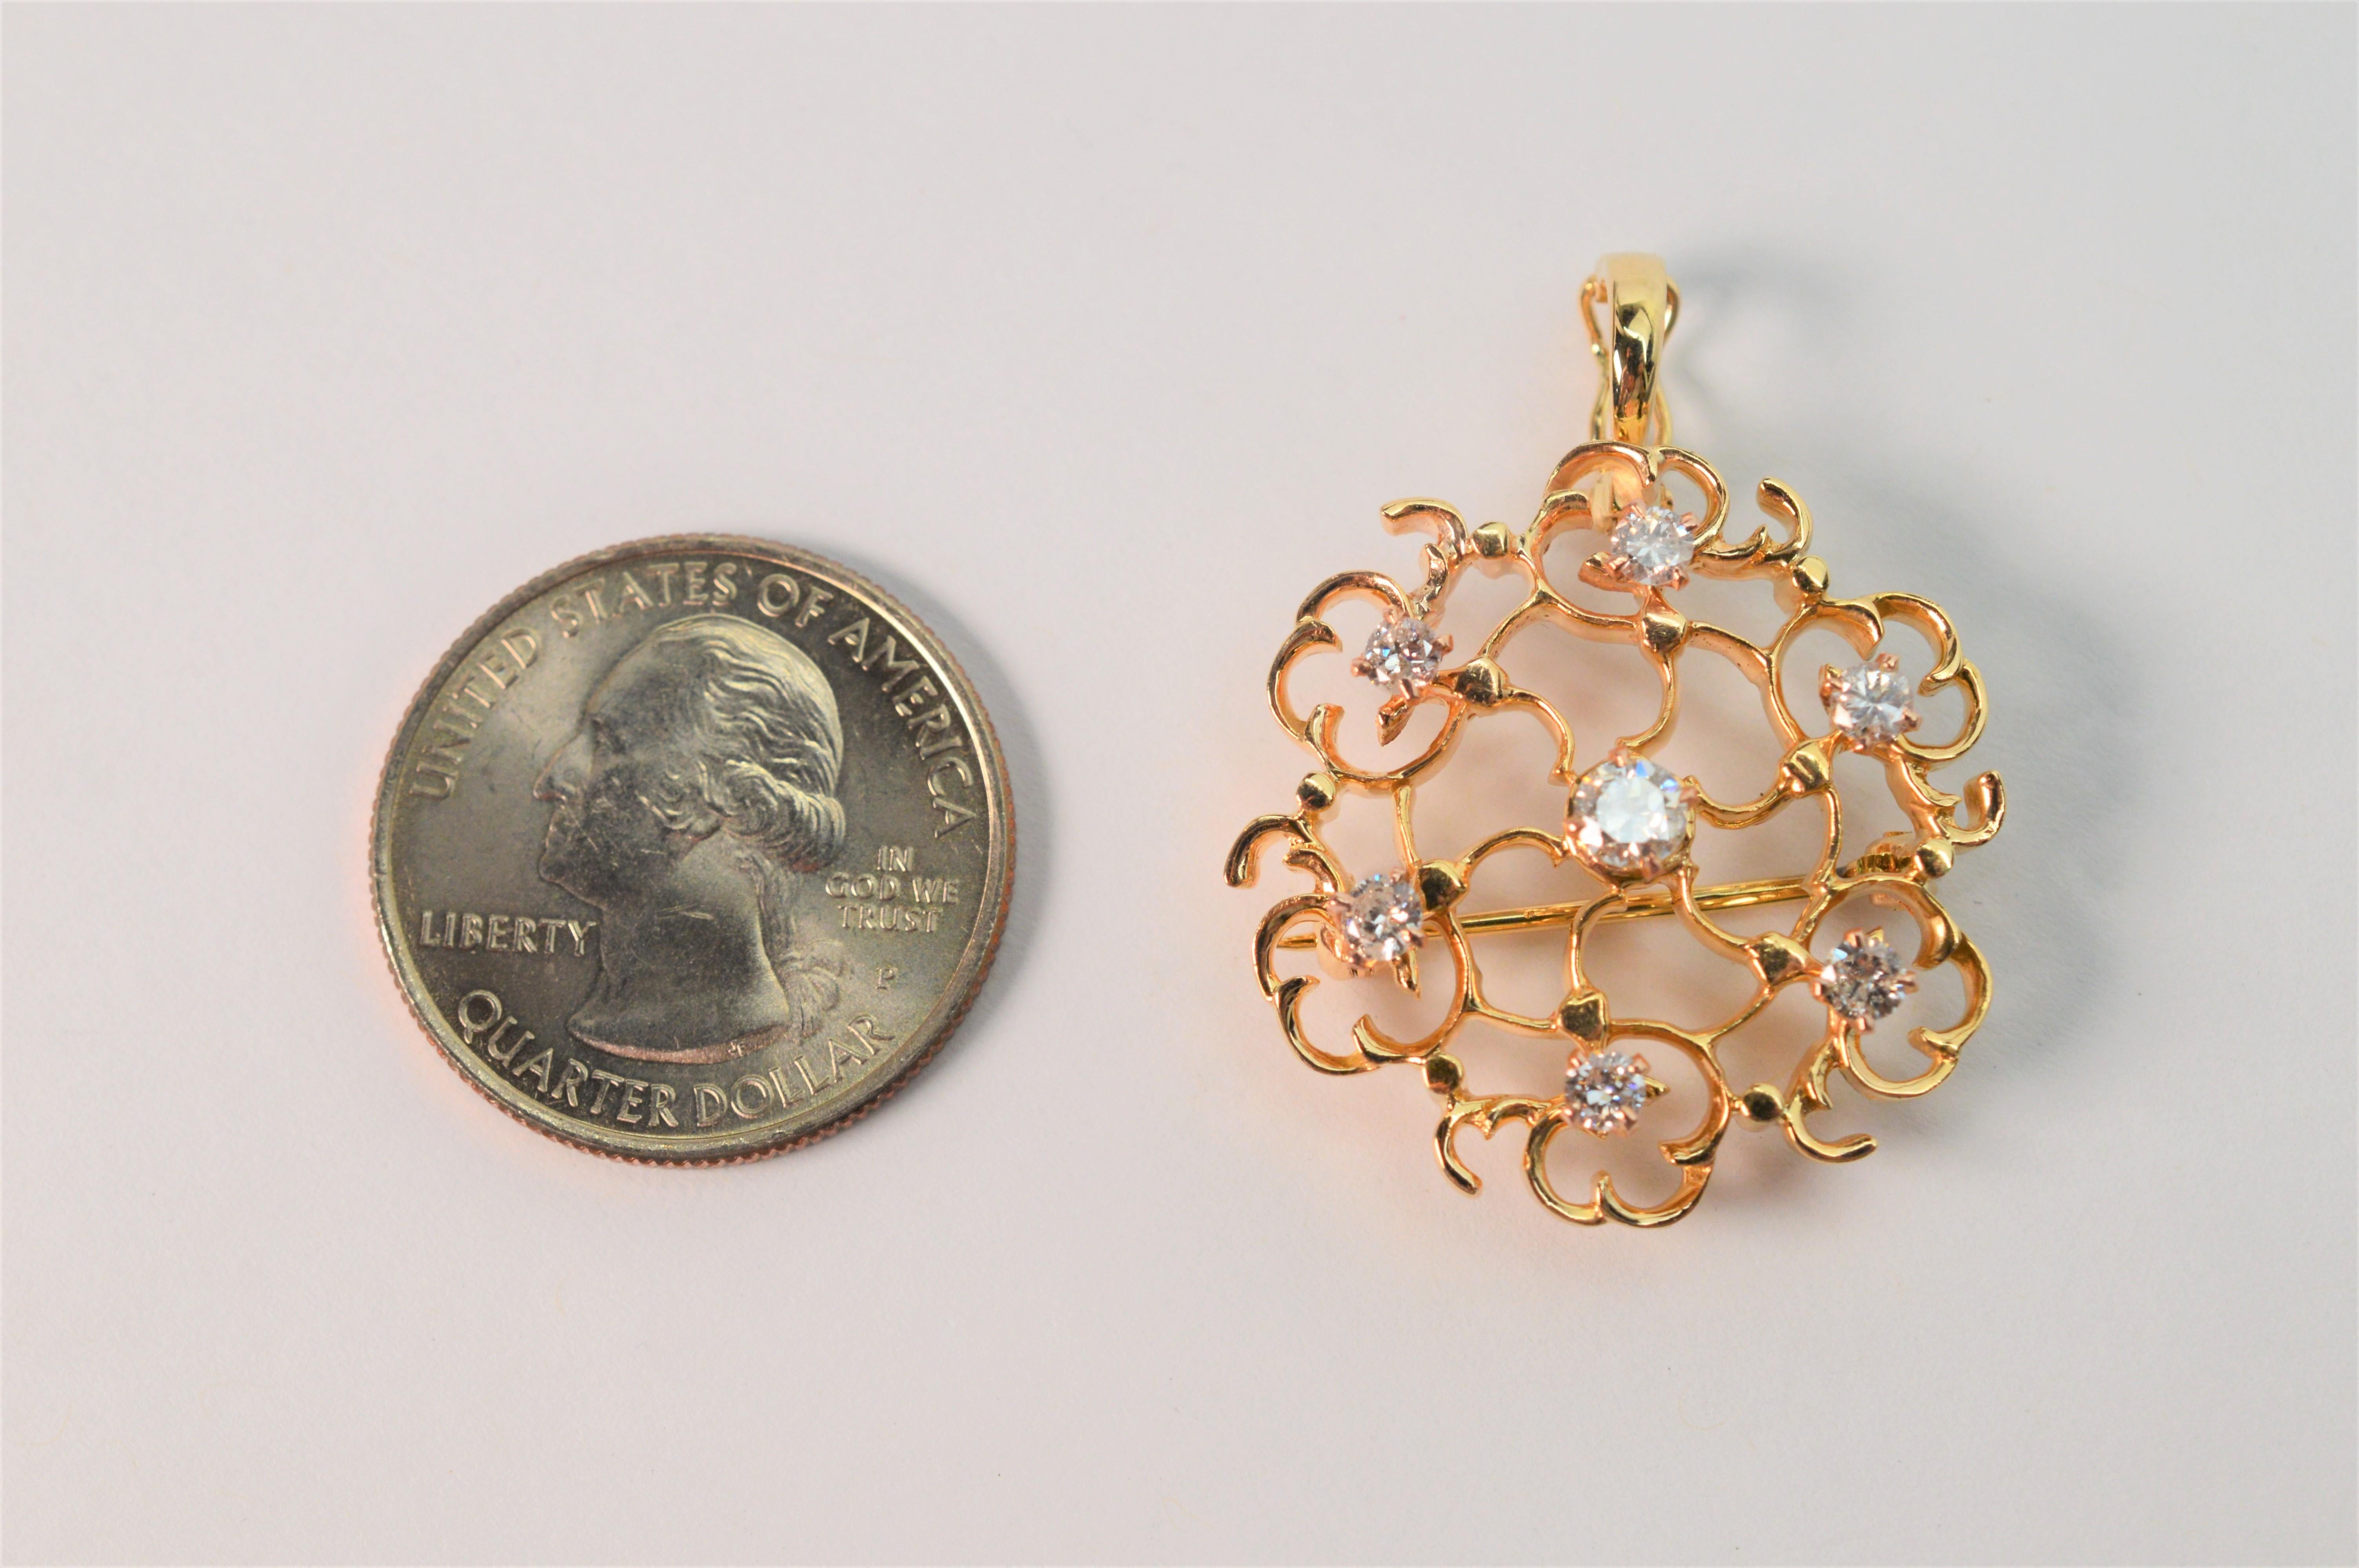 Floral Inspired Diamond 14K Yellow Gold Filigree Brooch w Enhancer Pendant In Excellent Condition For Sale In Mount Kisco, NY